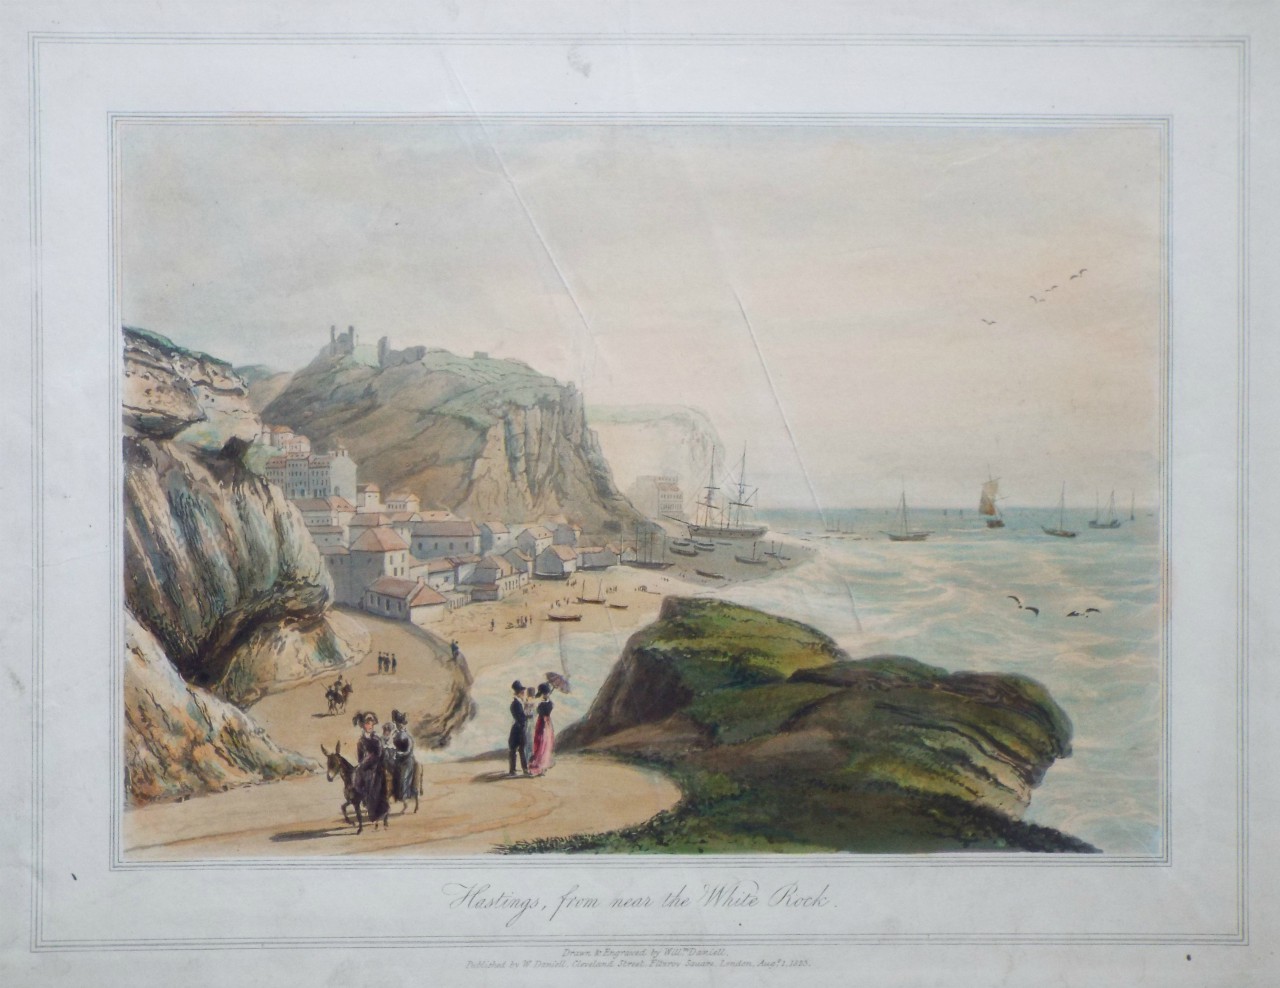 Aquatint - Hastings, from the White Rock. - Daniell